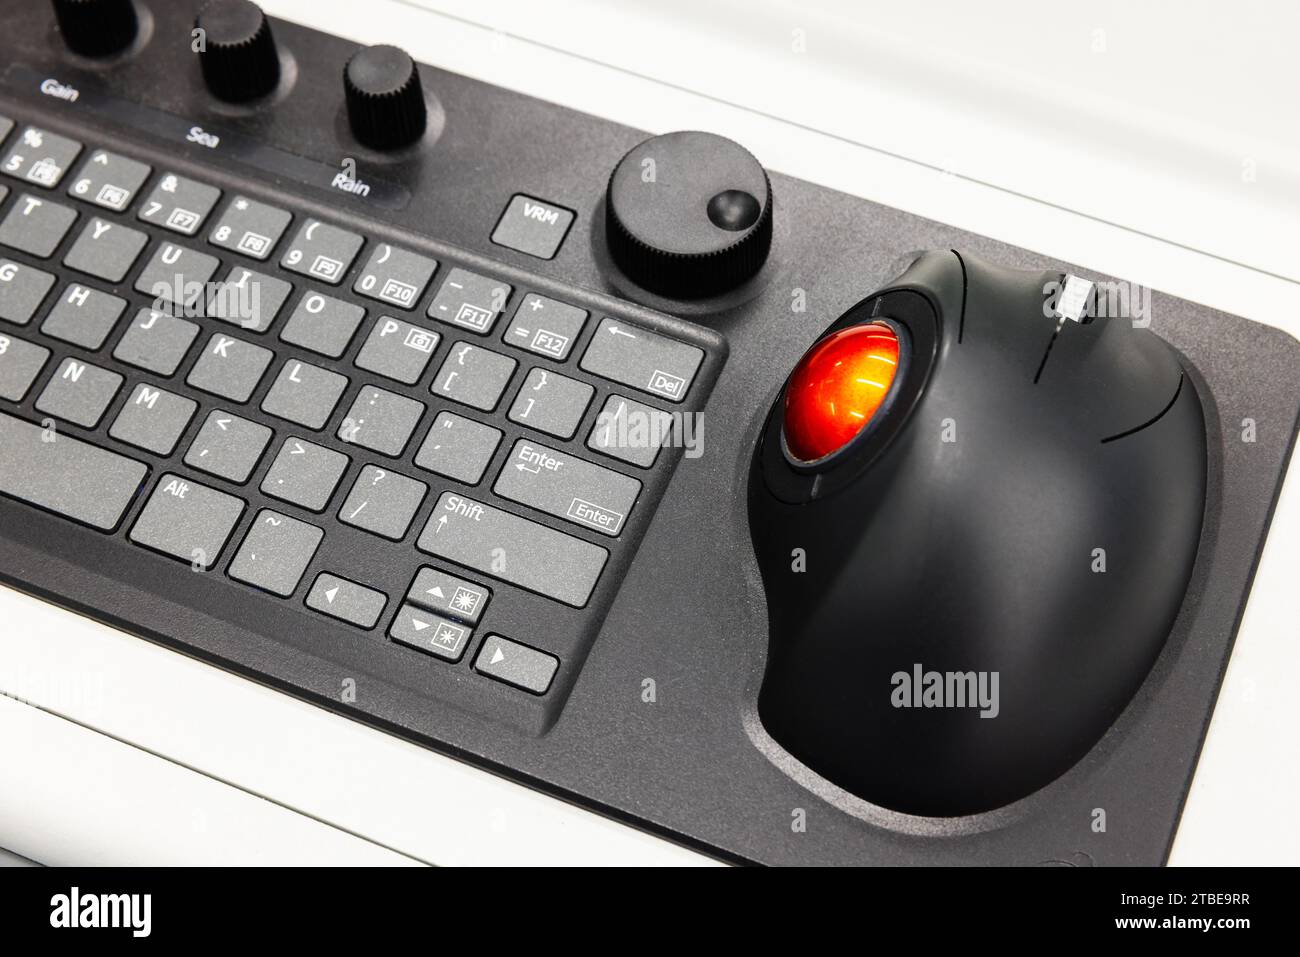 Built-in tabletop input device, black industrial keyboard with red trackball mouse, modern navigation equipment mounted on a control panel at captains Stock Photo